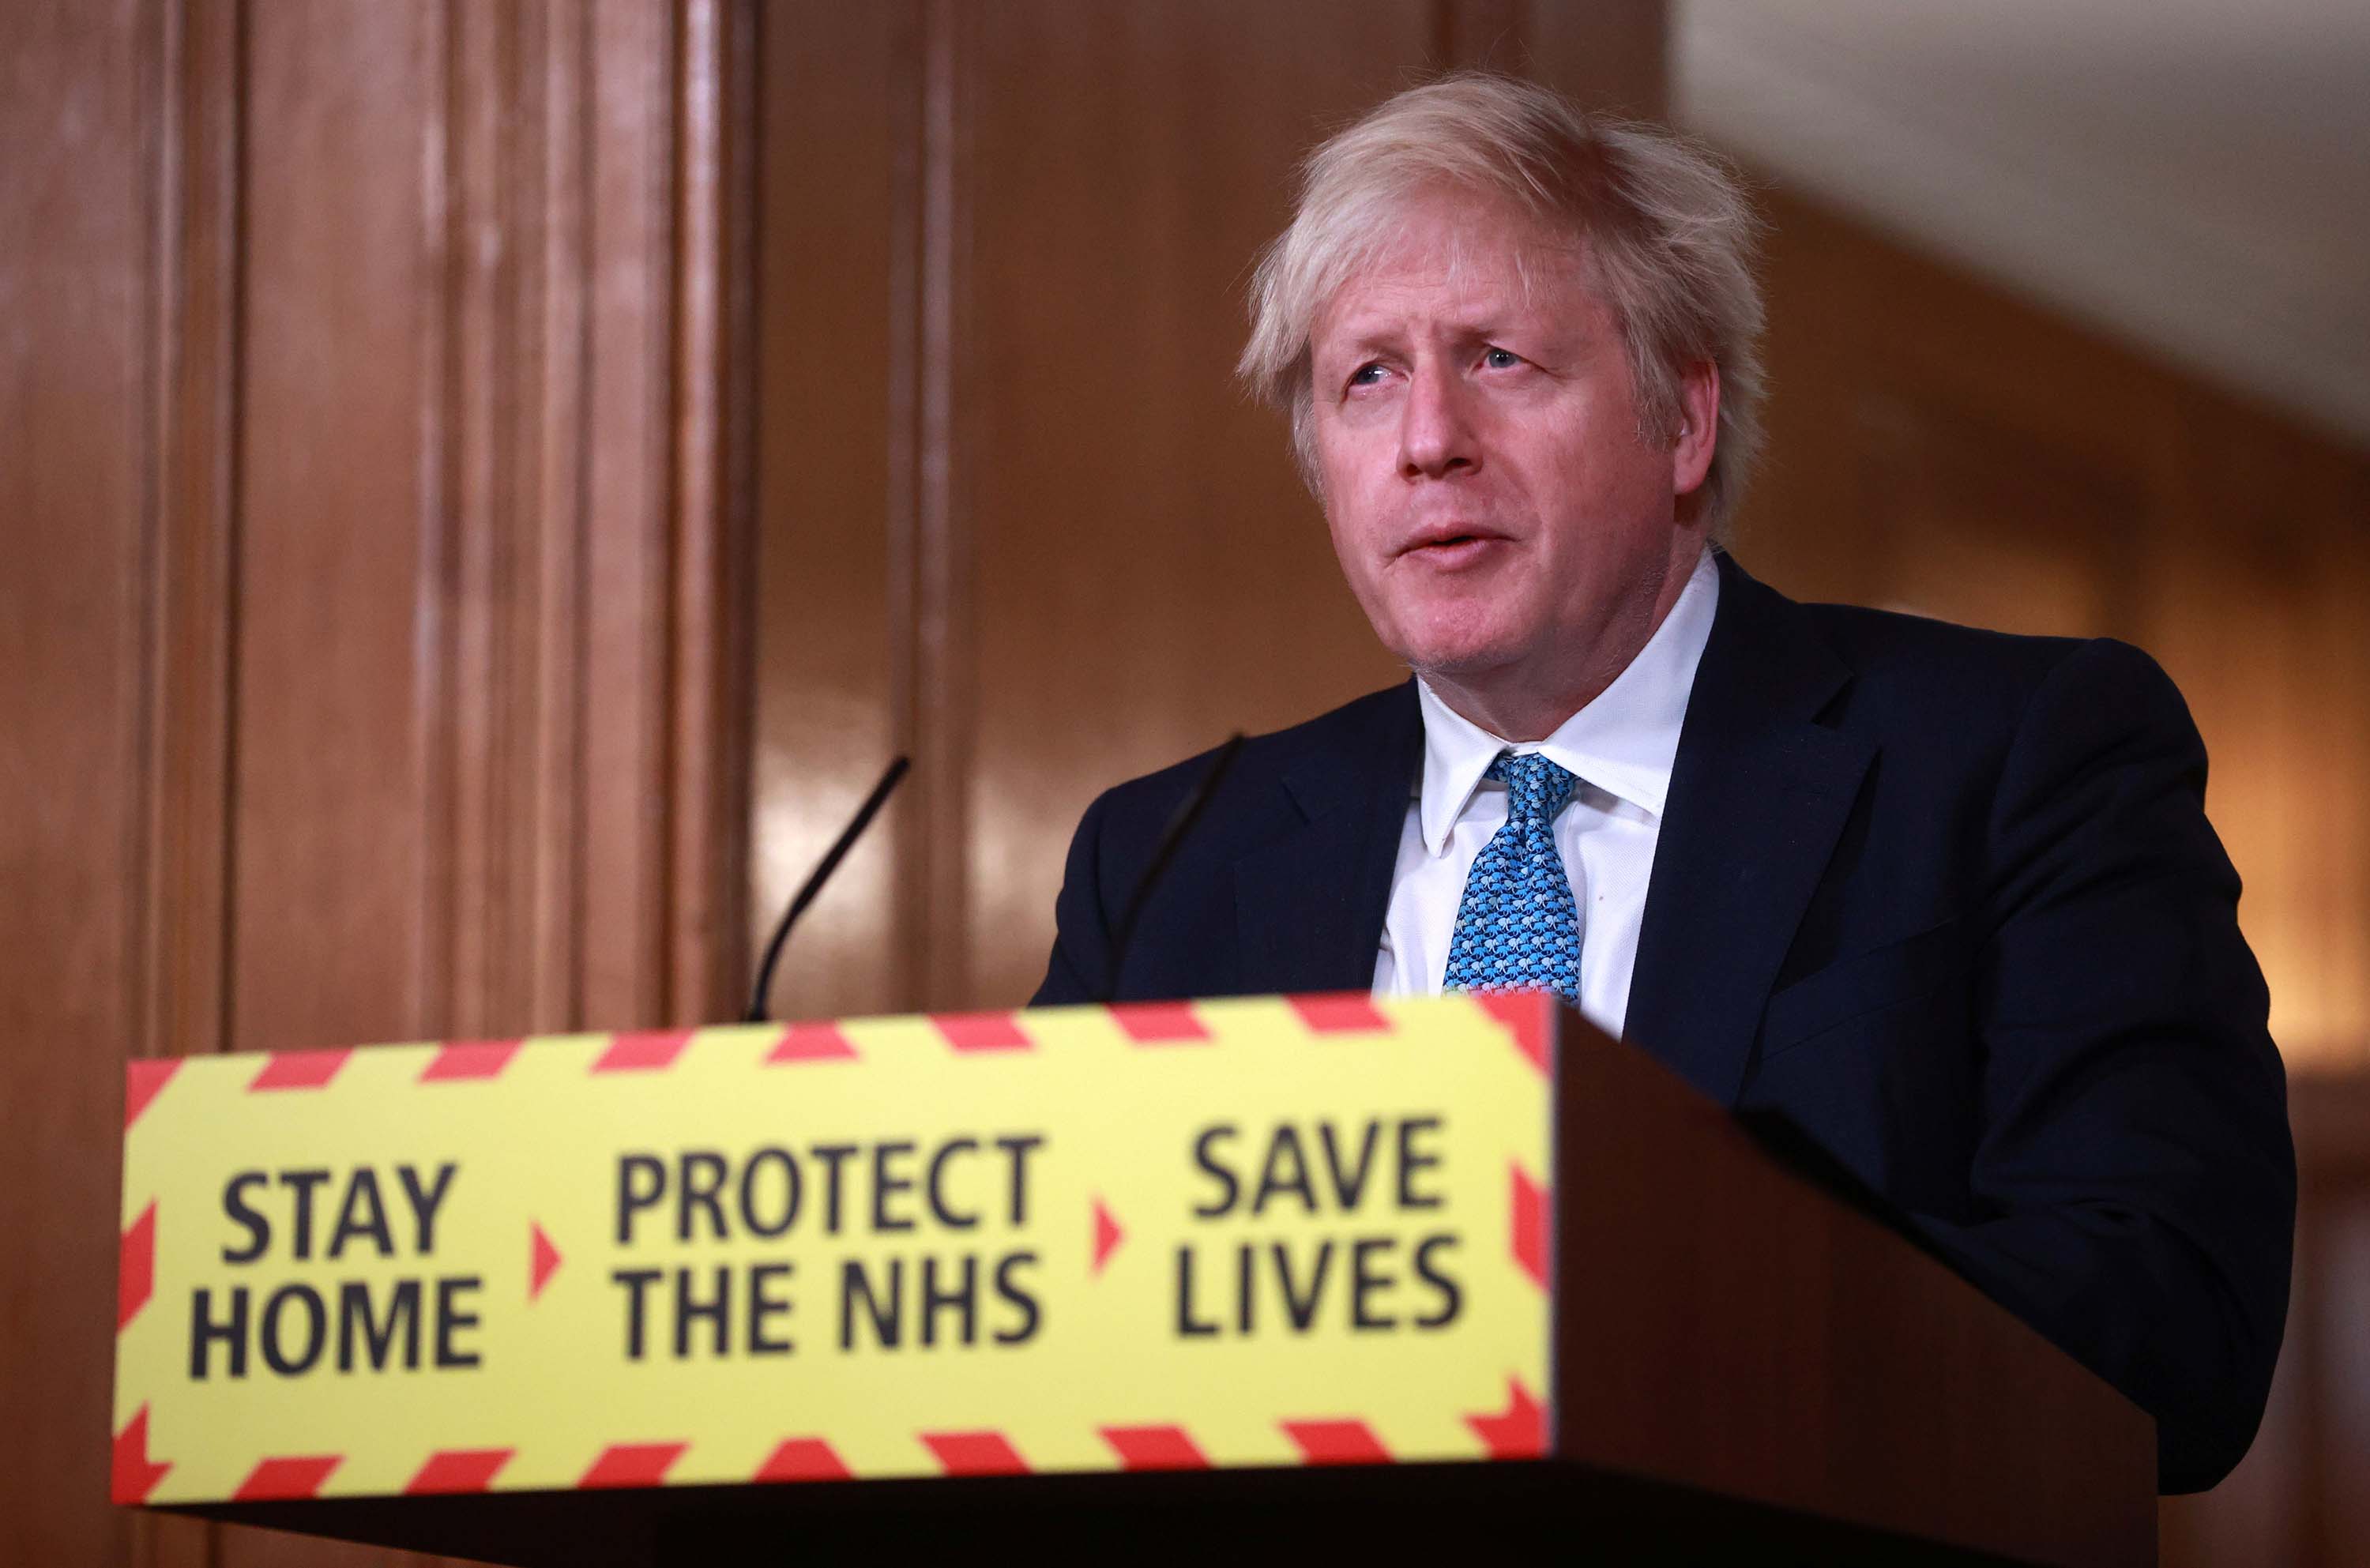 Britain's Prime Minister, Boris Johnson, attends a news conference with signage displaying the government slogan, "Stay Home, Protect the NHS, Save Lives," at 10 Downing Street in London, on January 5.